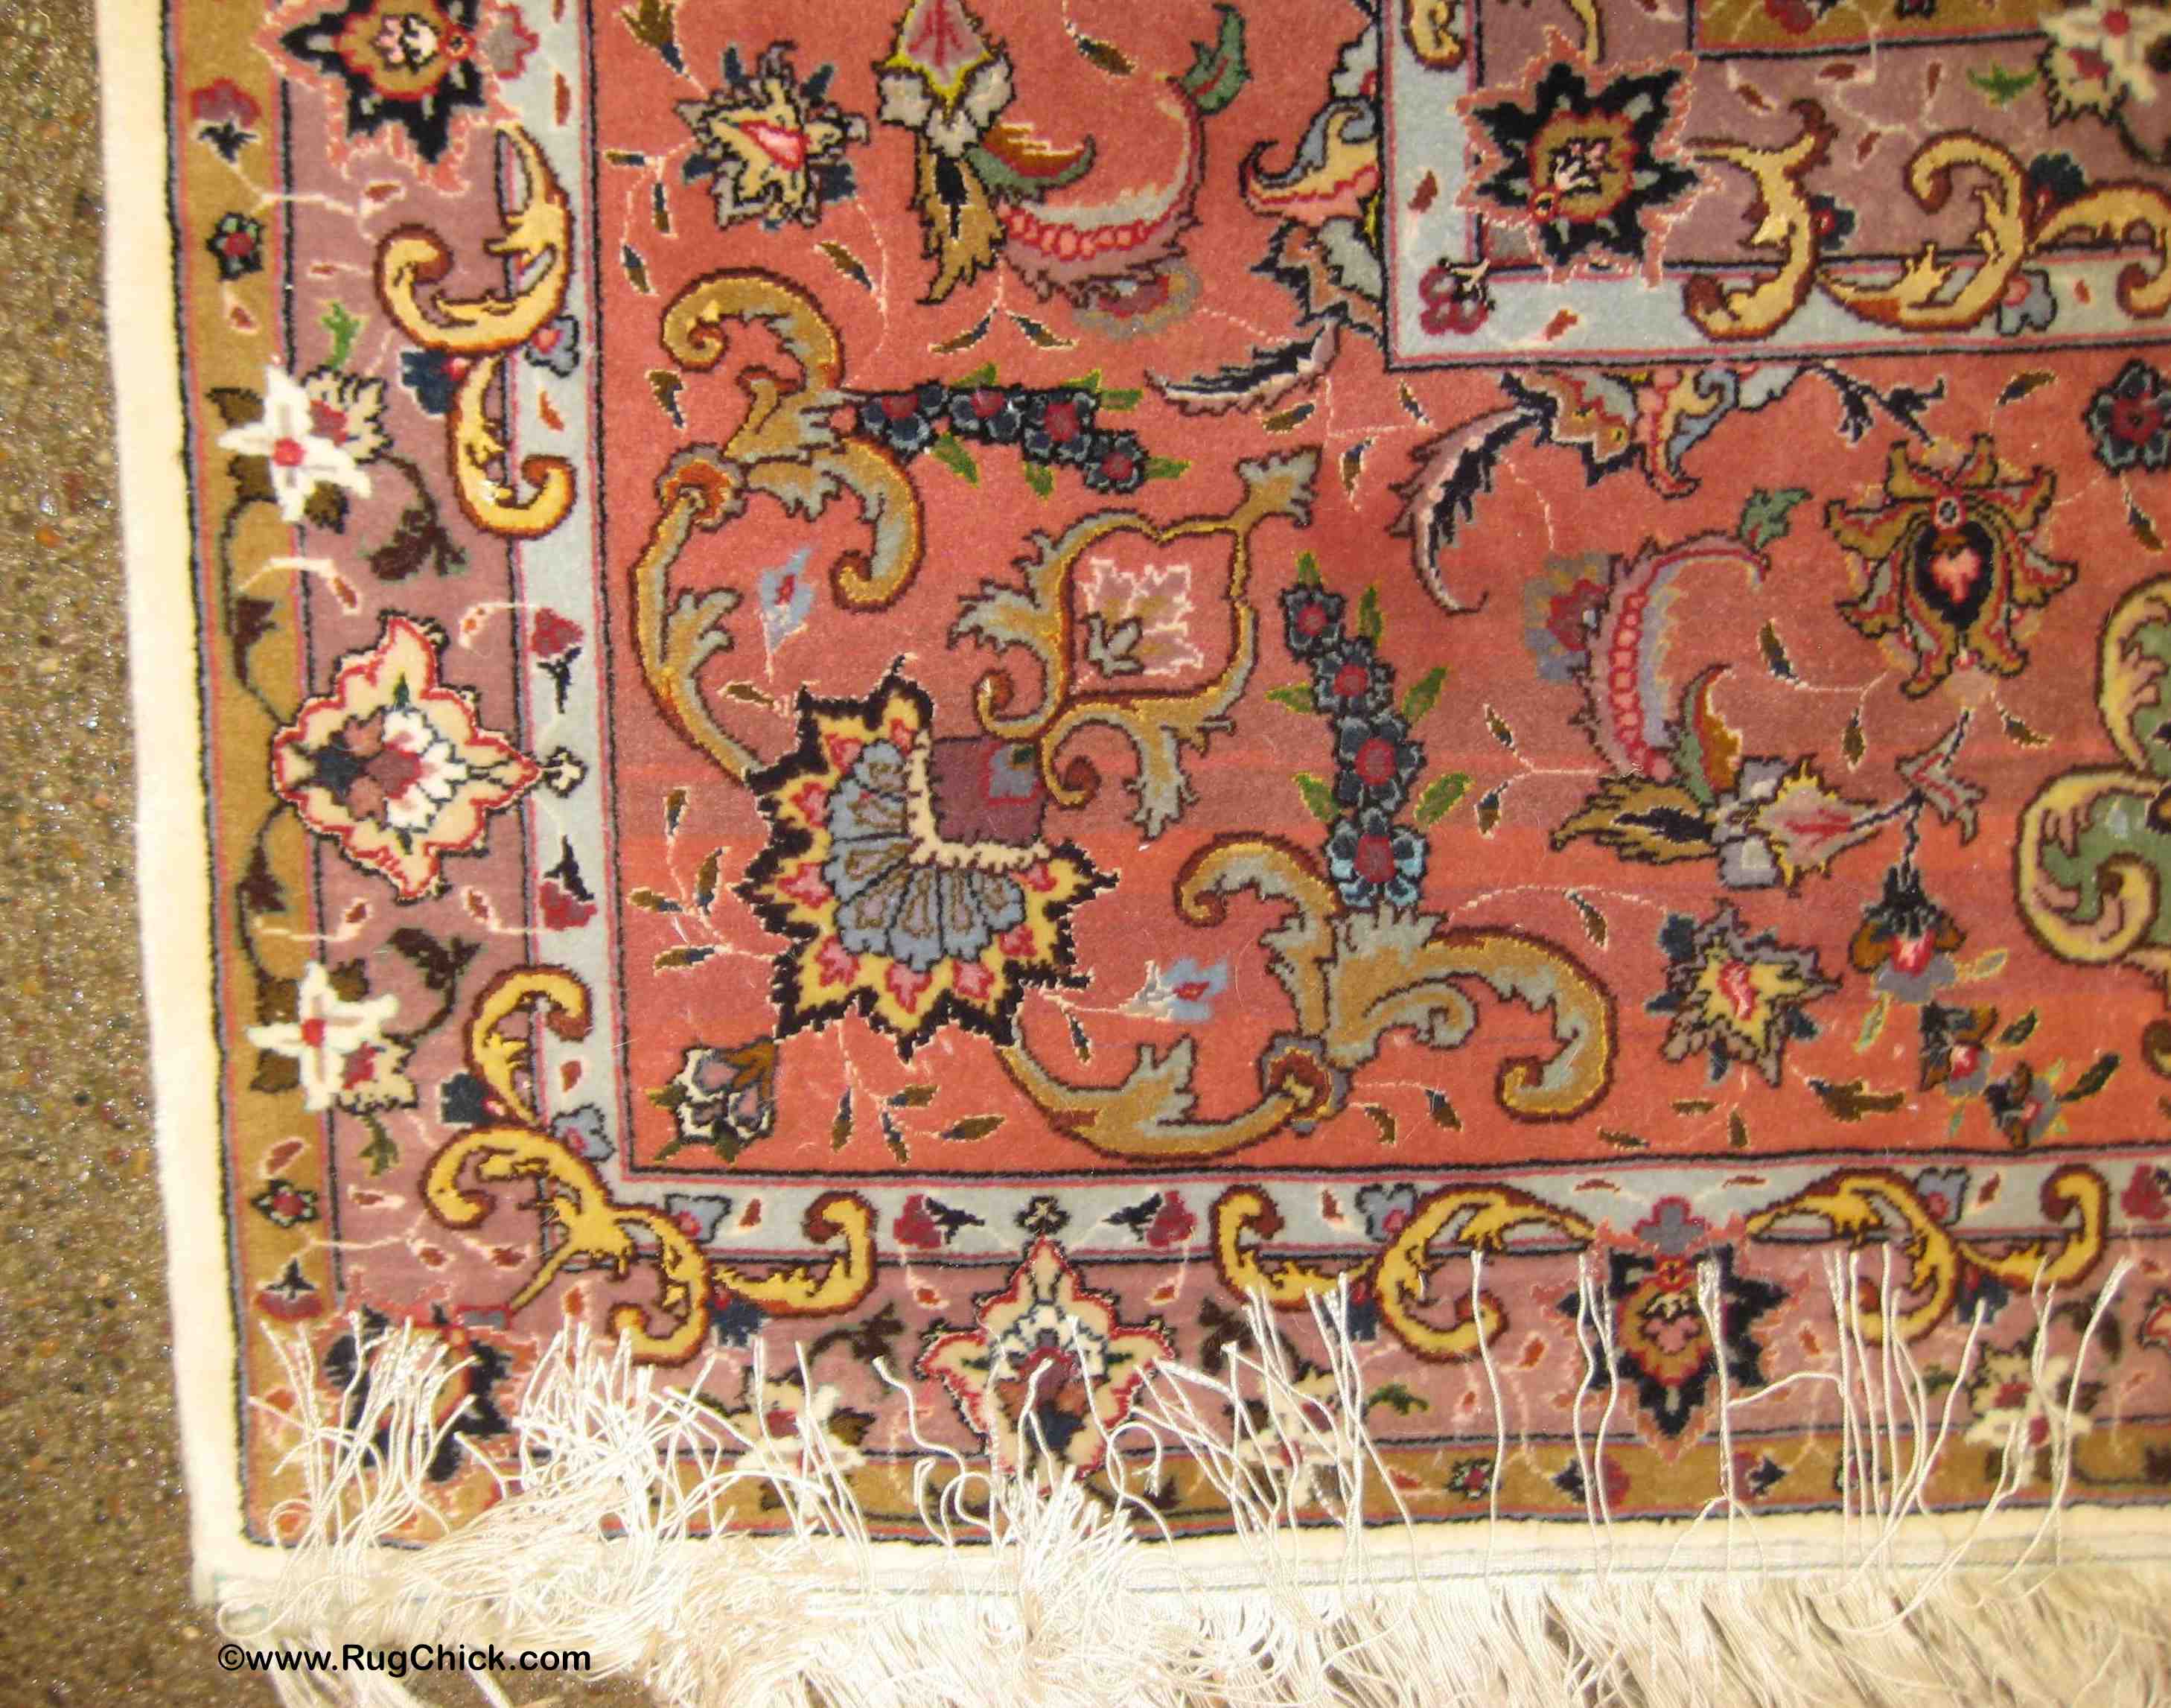 Synthetic Rugs What You Need To, How Do You Tell If A Rug Is Wool Or Synthetic